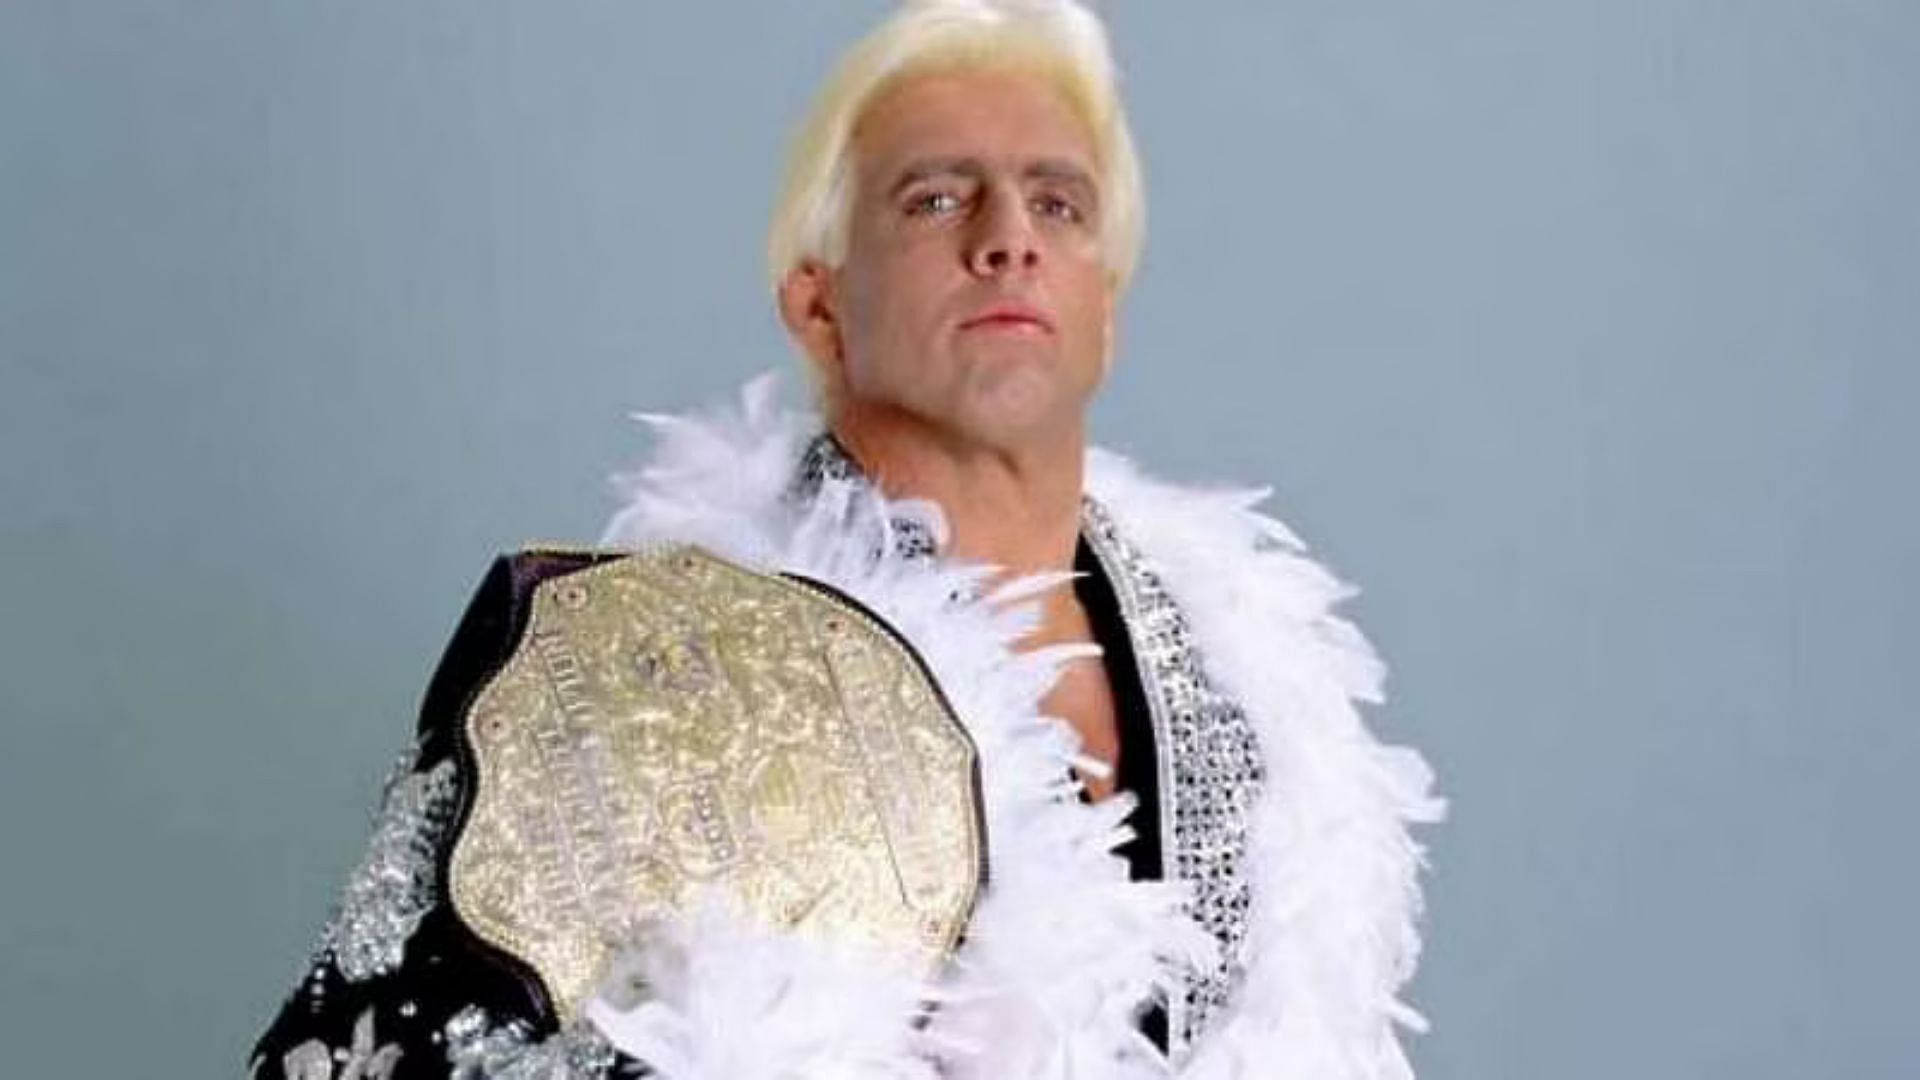 The Nature Boy was not always Styling and profiling (Courtesy WWE)